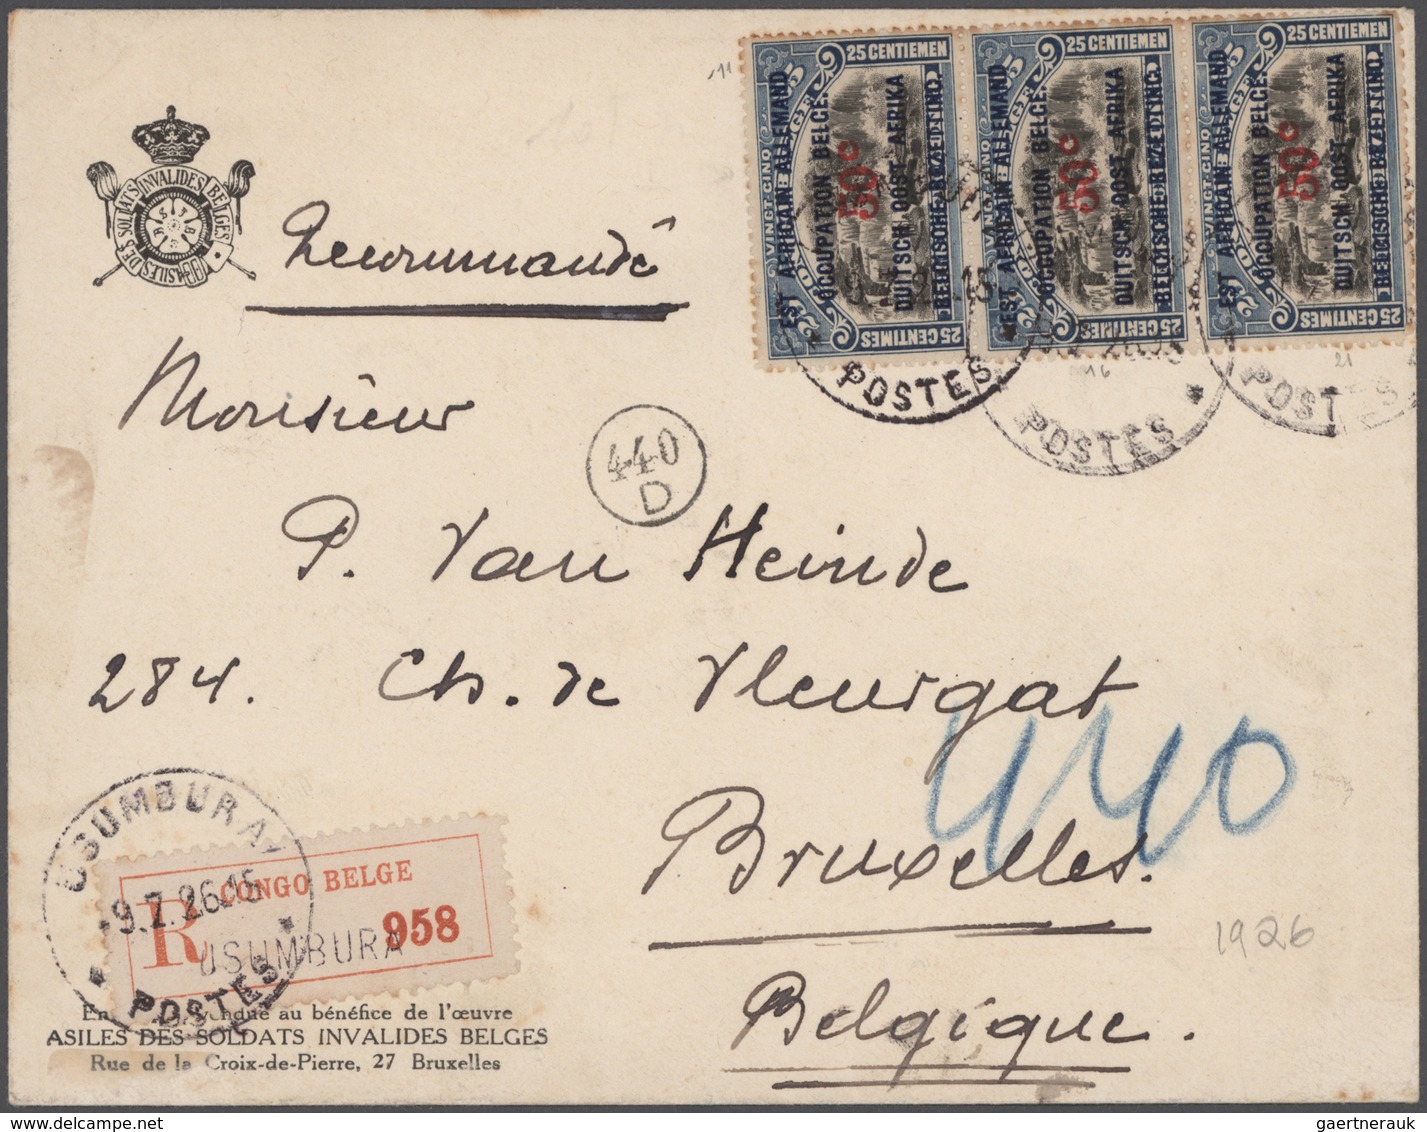 Belgisch-Kongo: 1896-1940's ca.: Group of 45 covers, postal stationery cards, telegrams and document